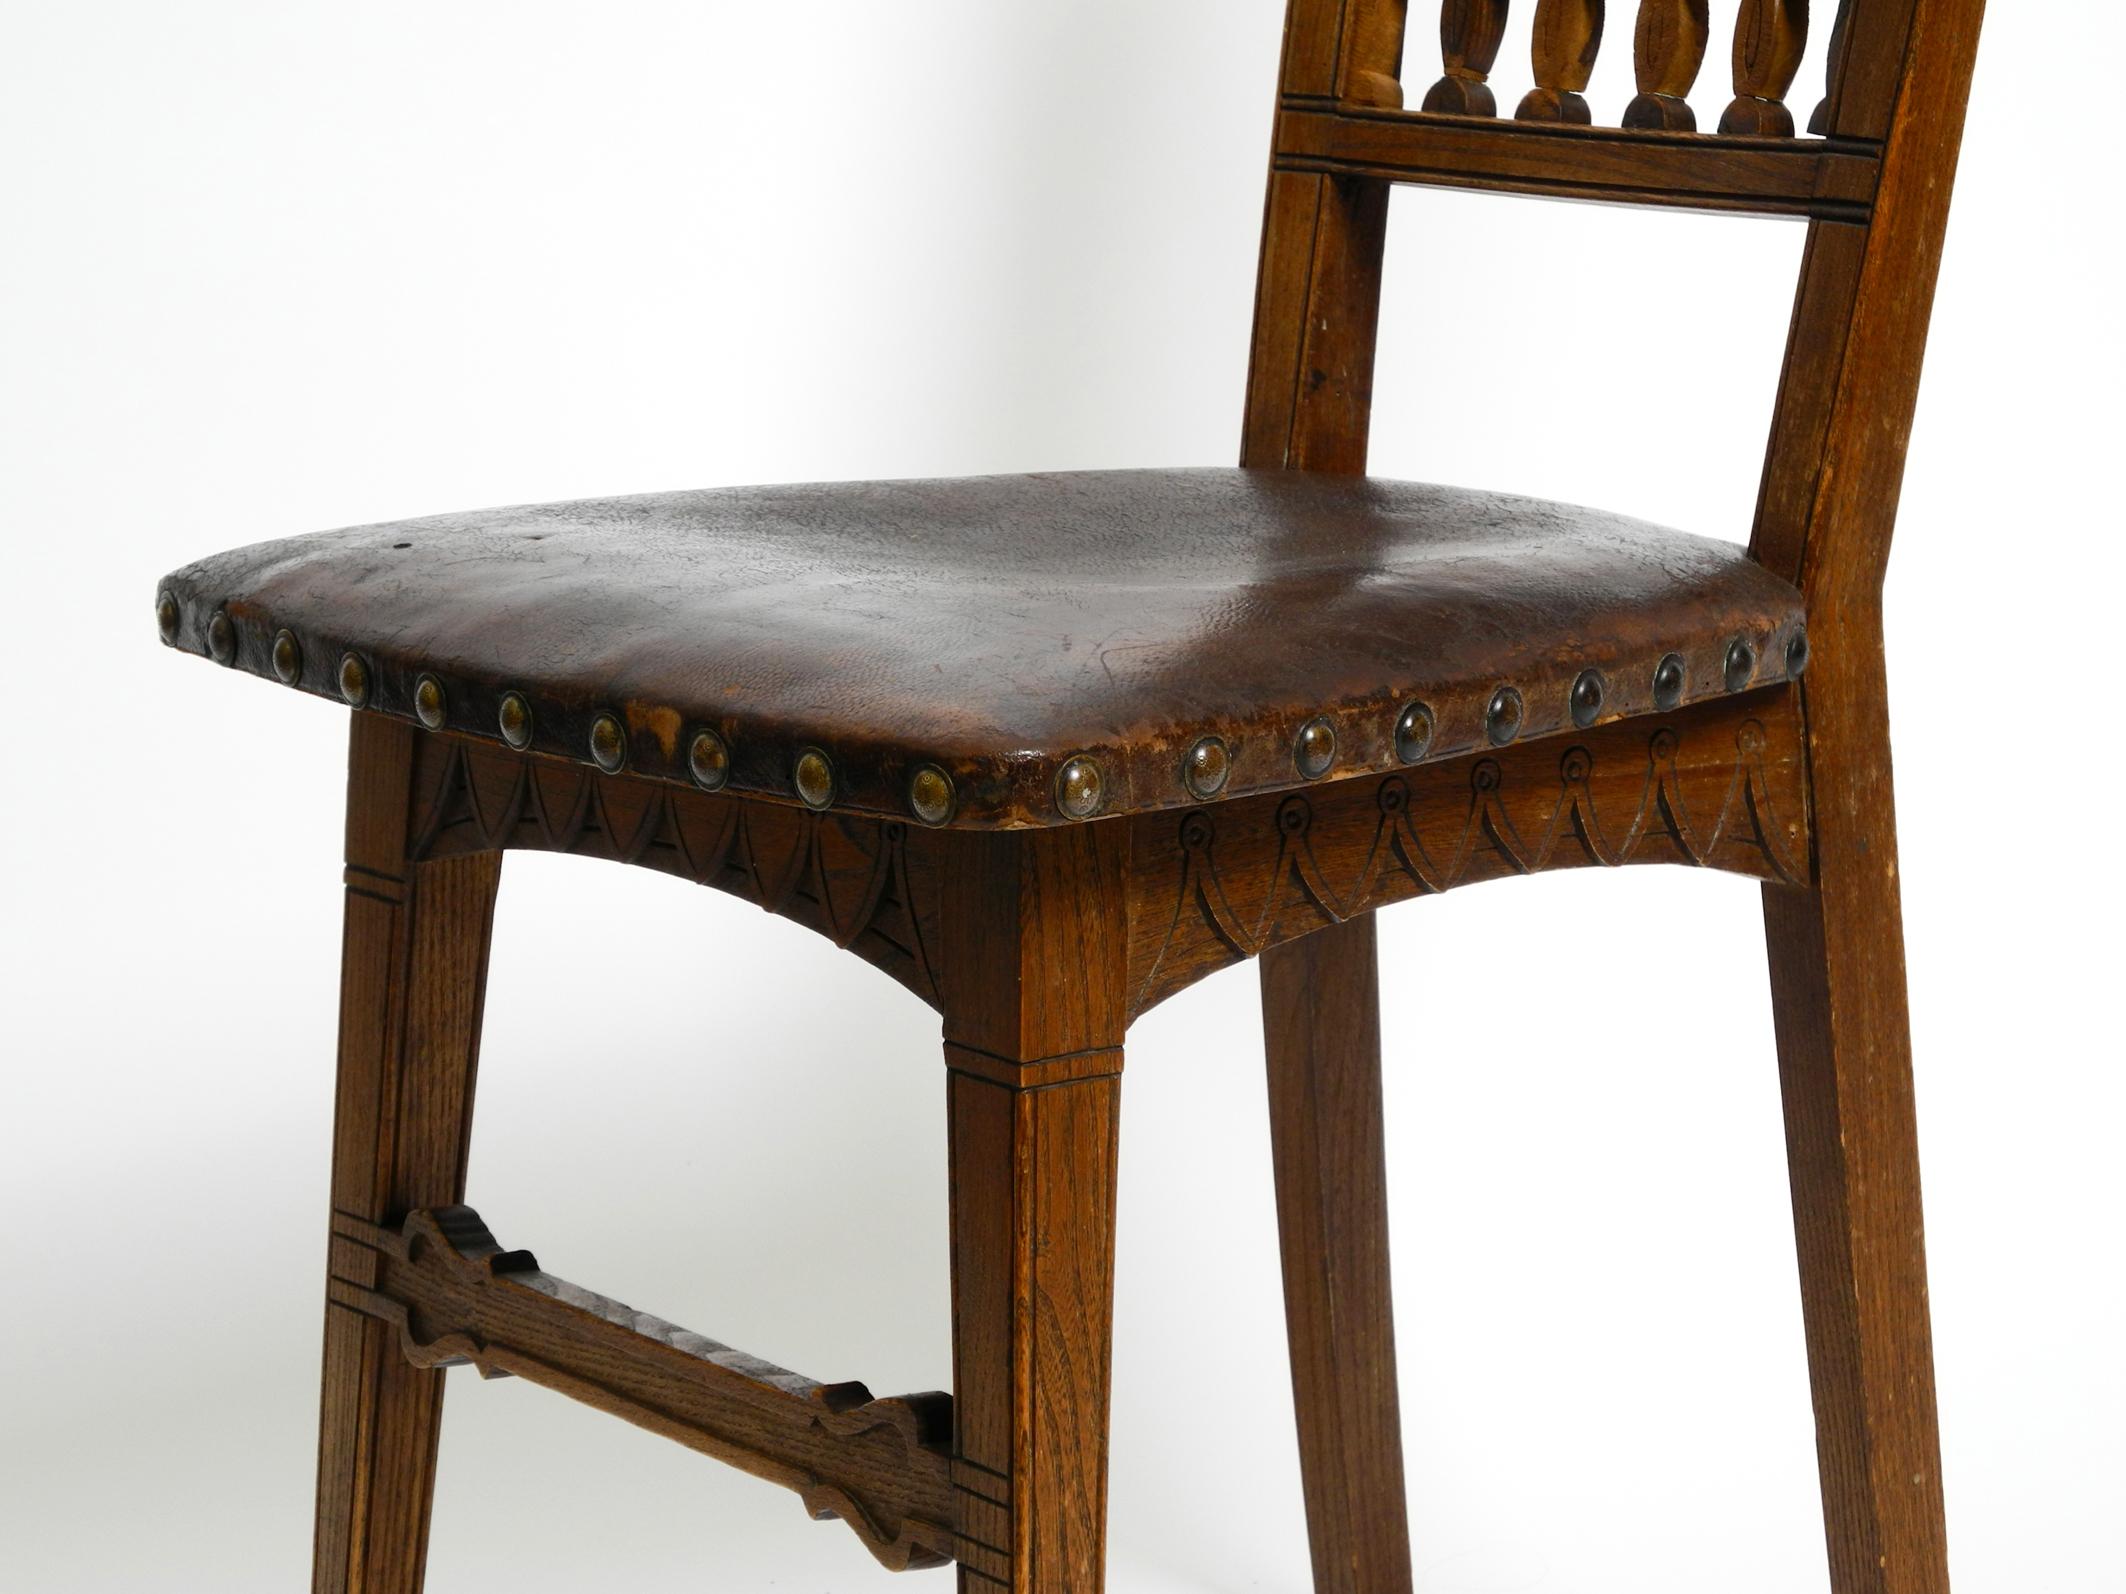 2 Art Nouveau Oak Chairs Still with the Original Leather Seats from Around 1900 For Sale 3